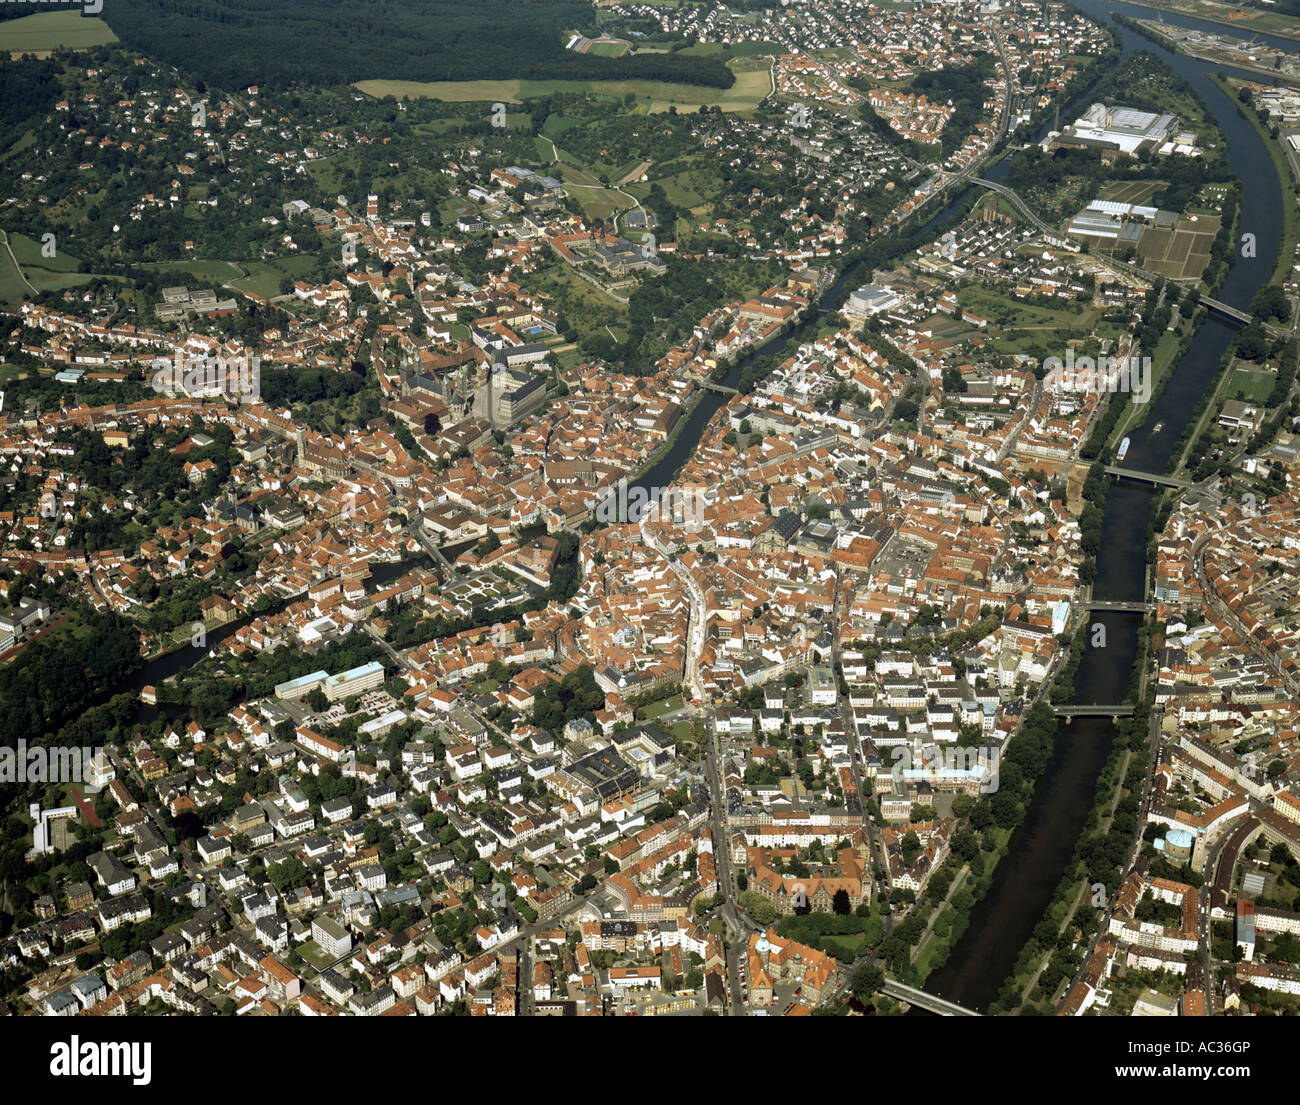 Bamberg, overview, rigth side Main-Donau canal, left side river Regnitz, Germany, Bavaria, Bamberg Stock Photo